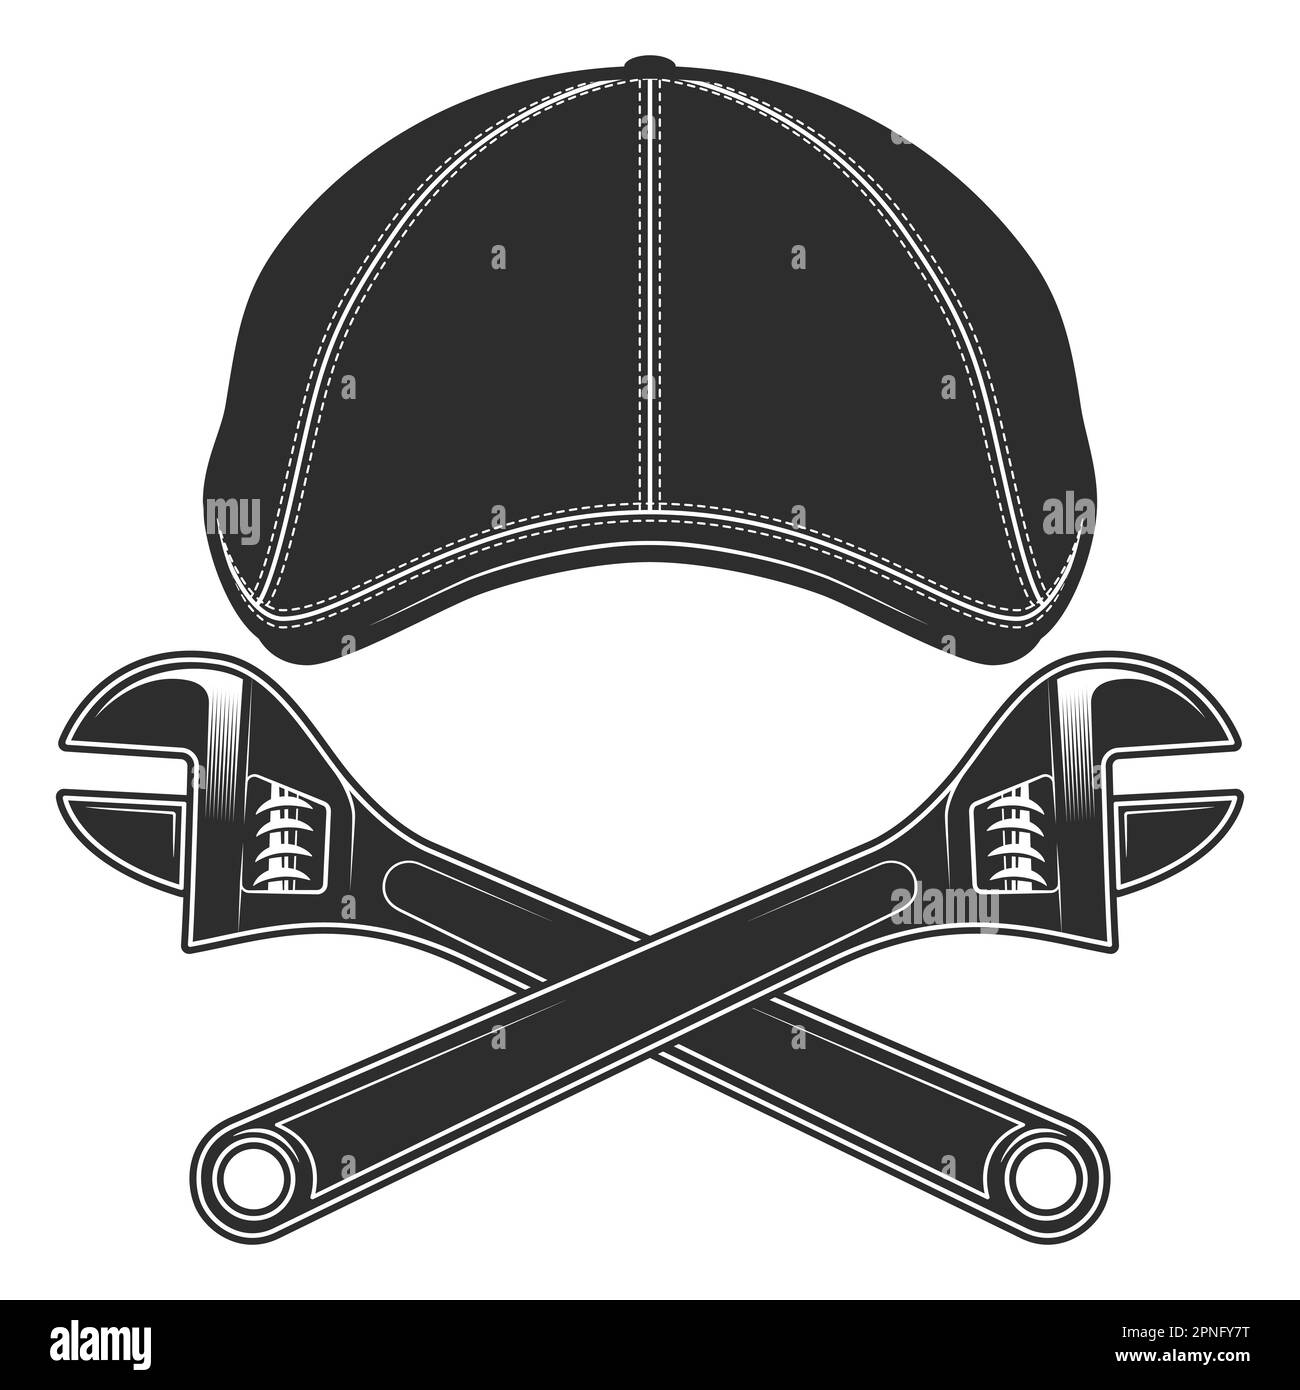 Flat cap gatsby tweed hat with constriction service repair mechanic adjustable wrench vector vintage illustration Stock Vector